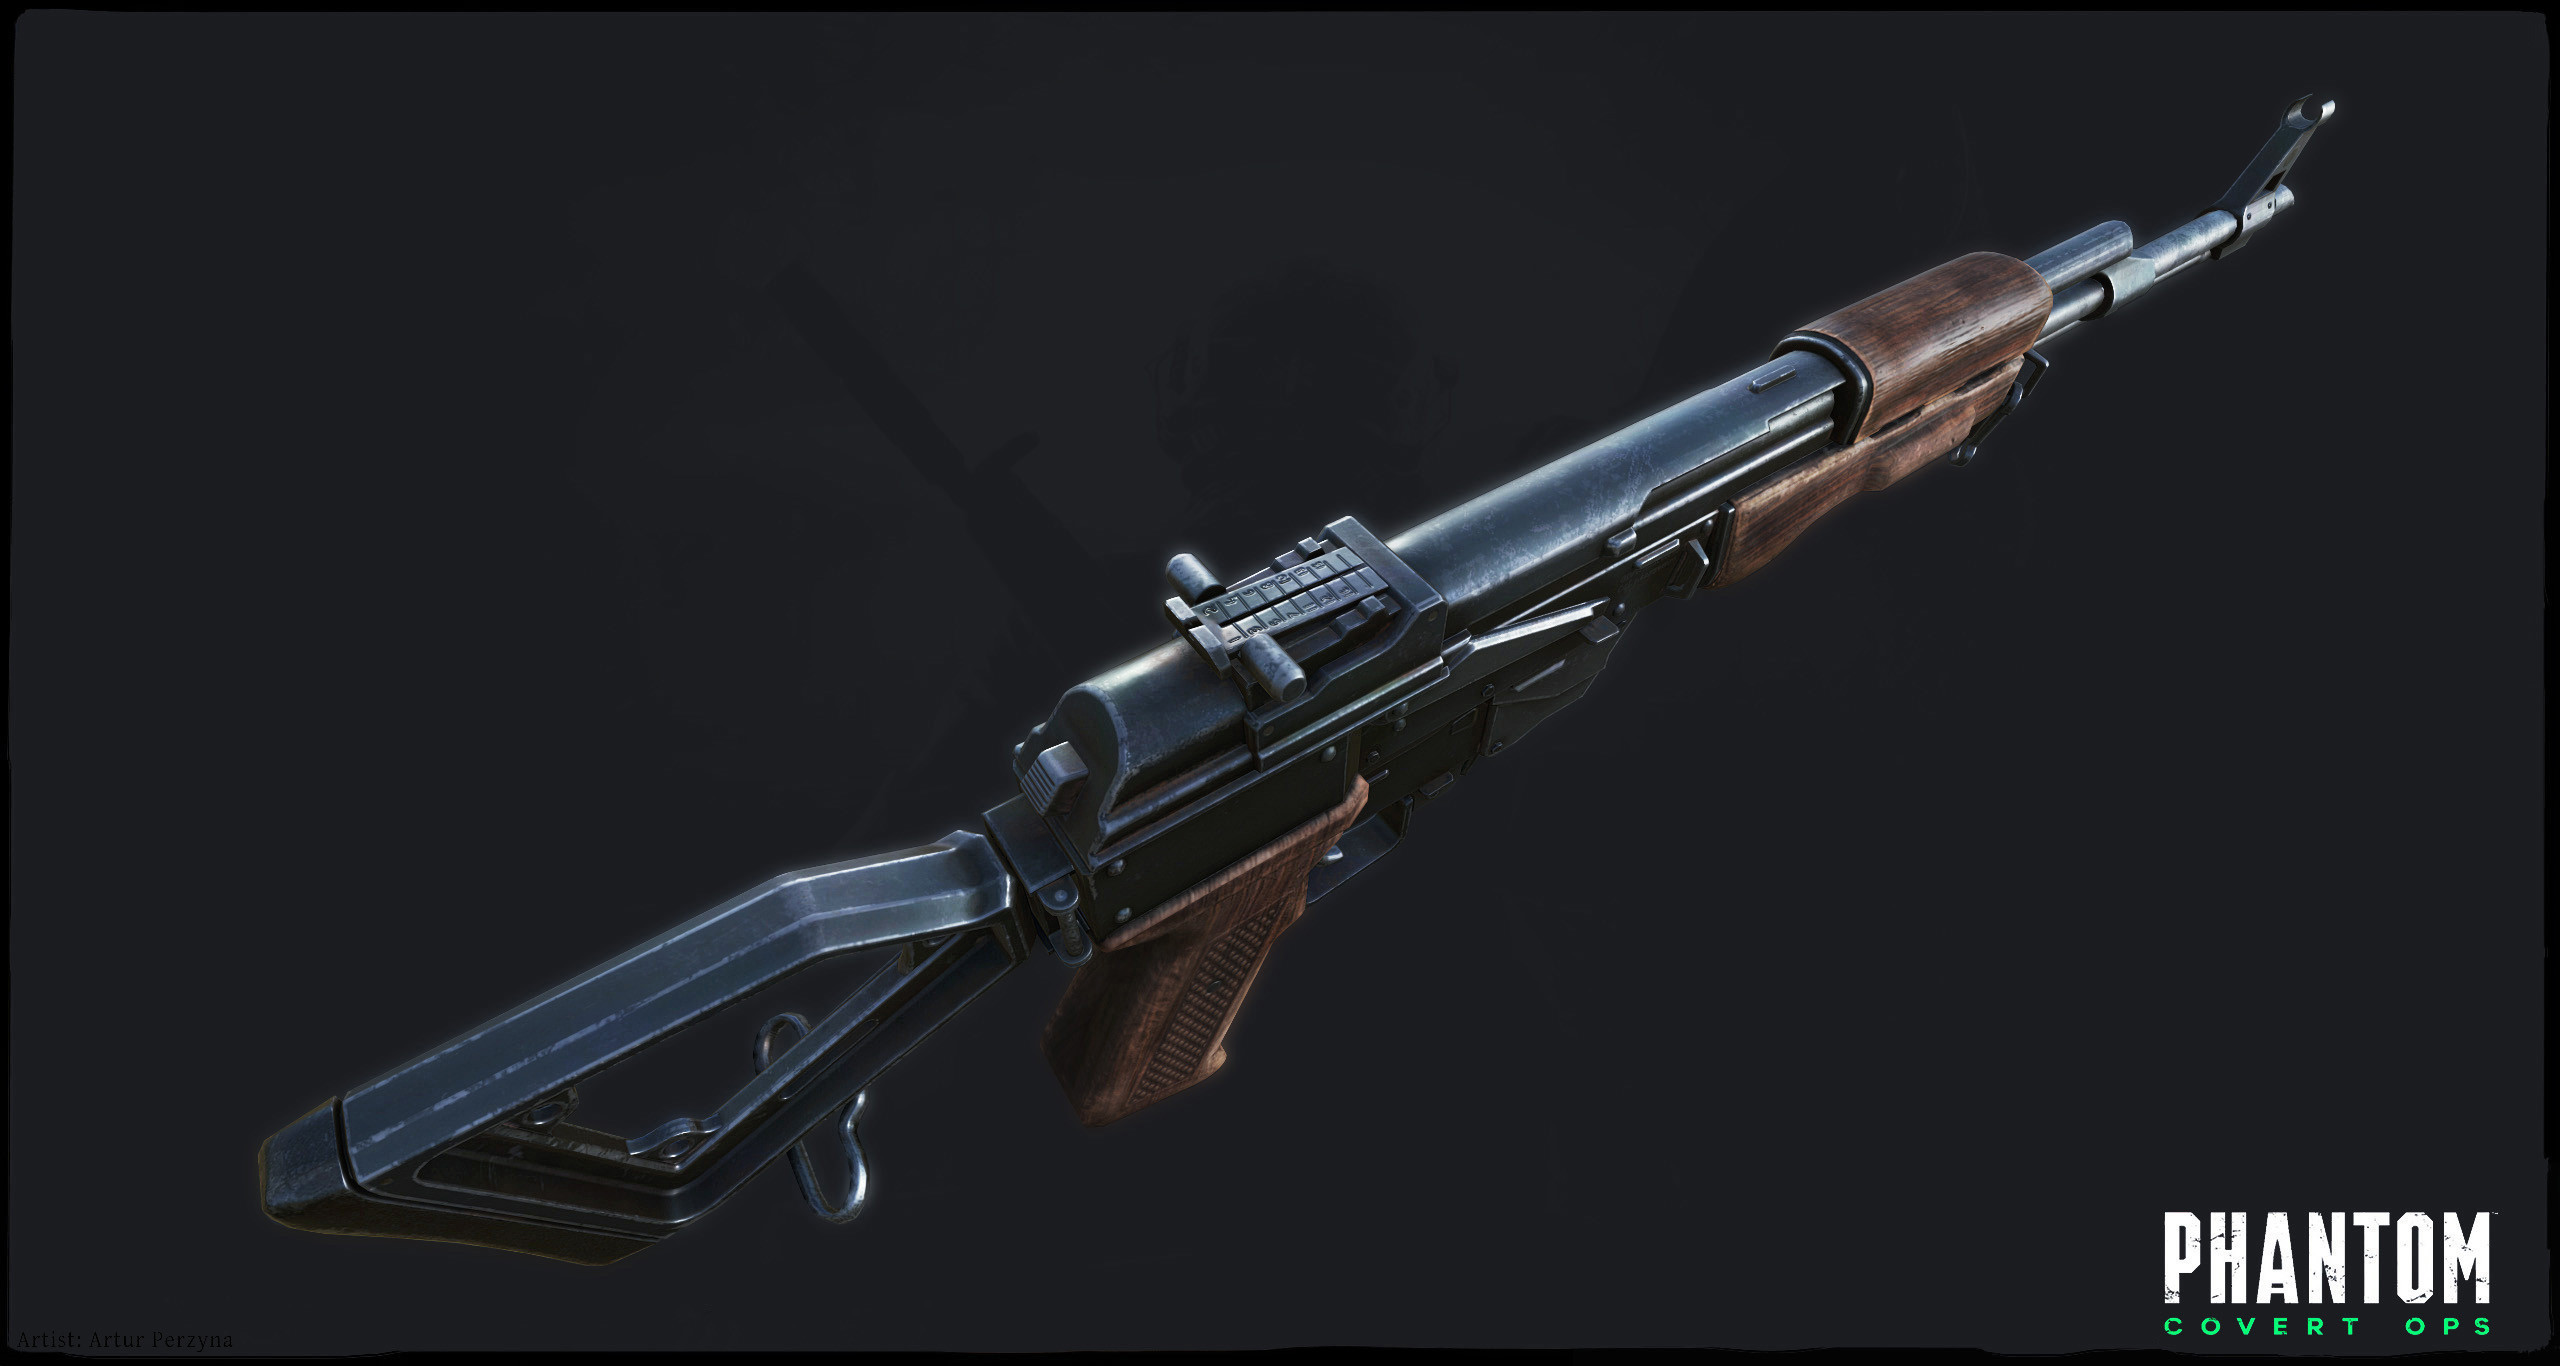 Substance Painter, AKSM with a custom stock and our own proportions due VR req.